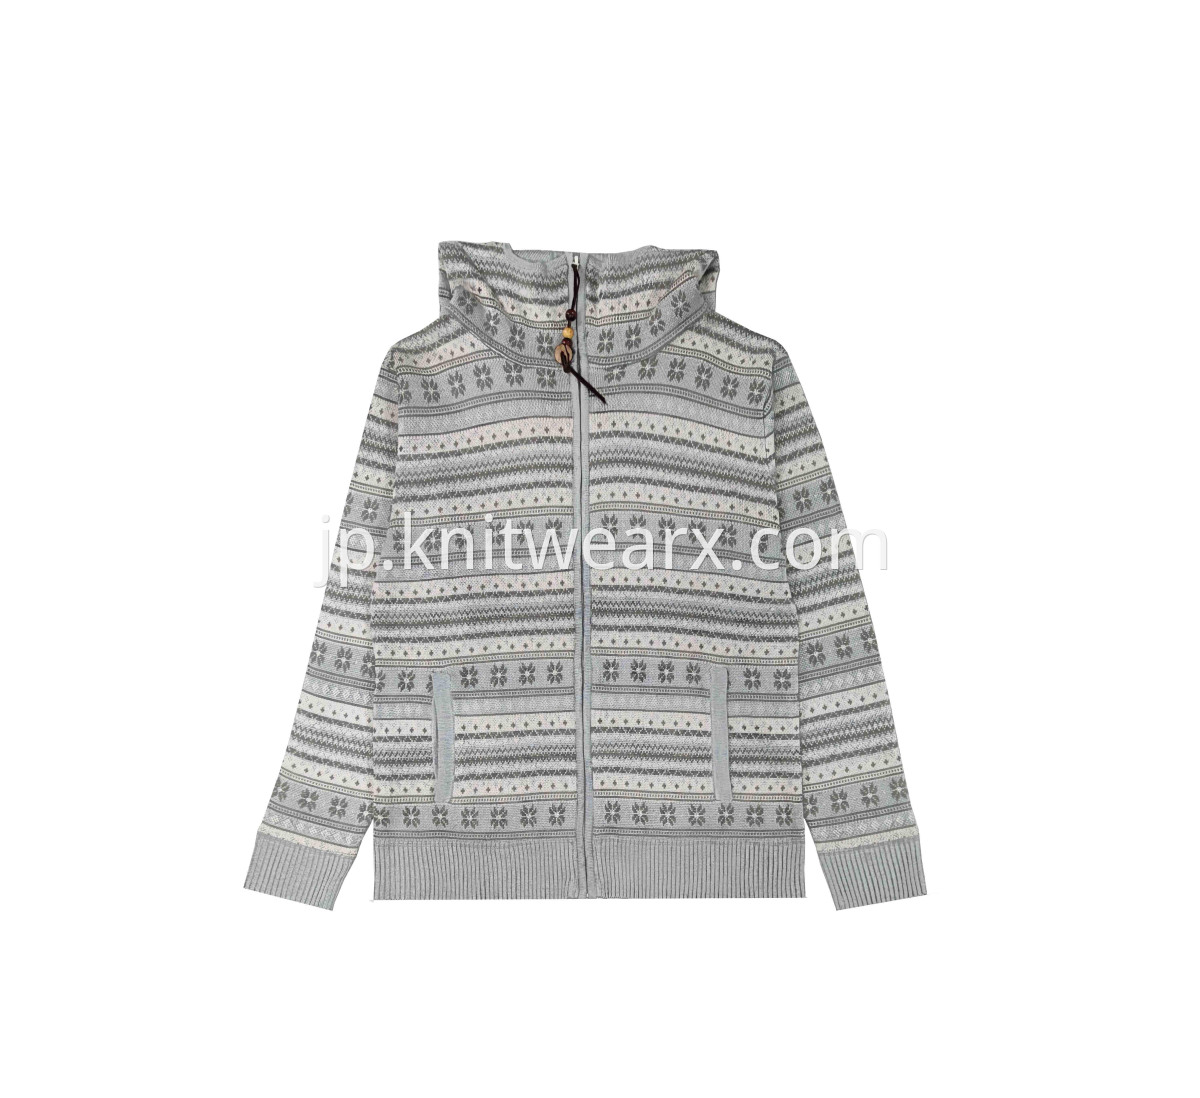 Men's 100% Acrylic Knitted Sweater Snow Jacquard Full Zip Hoodie